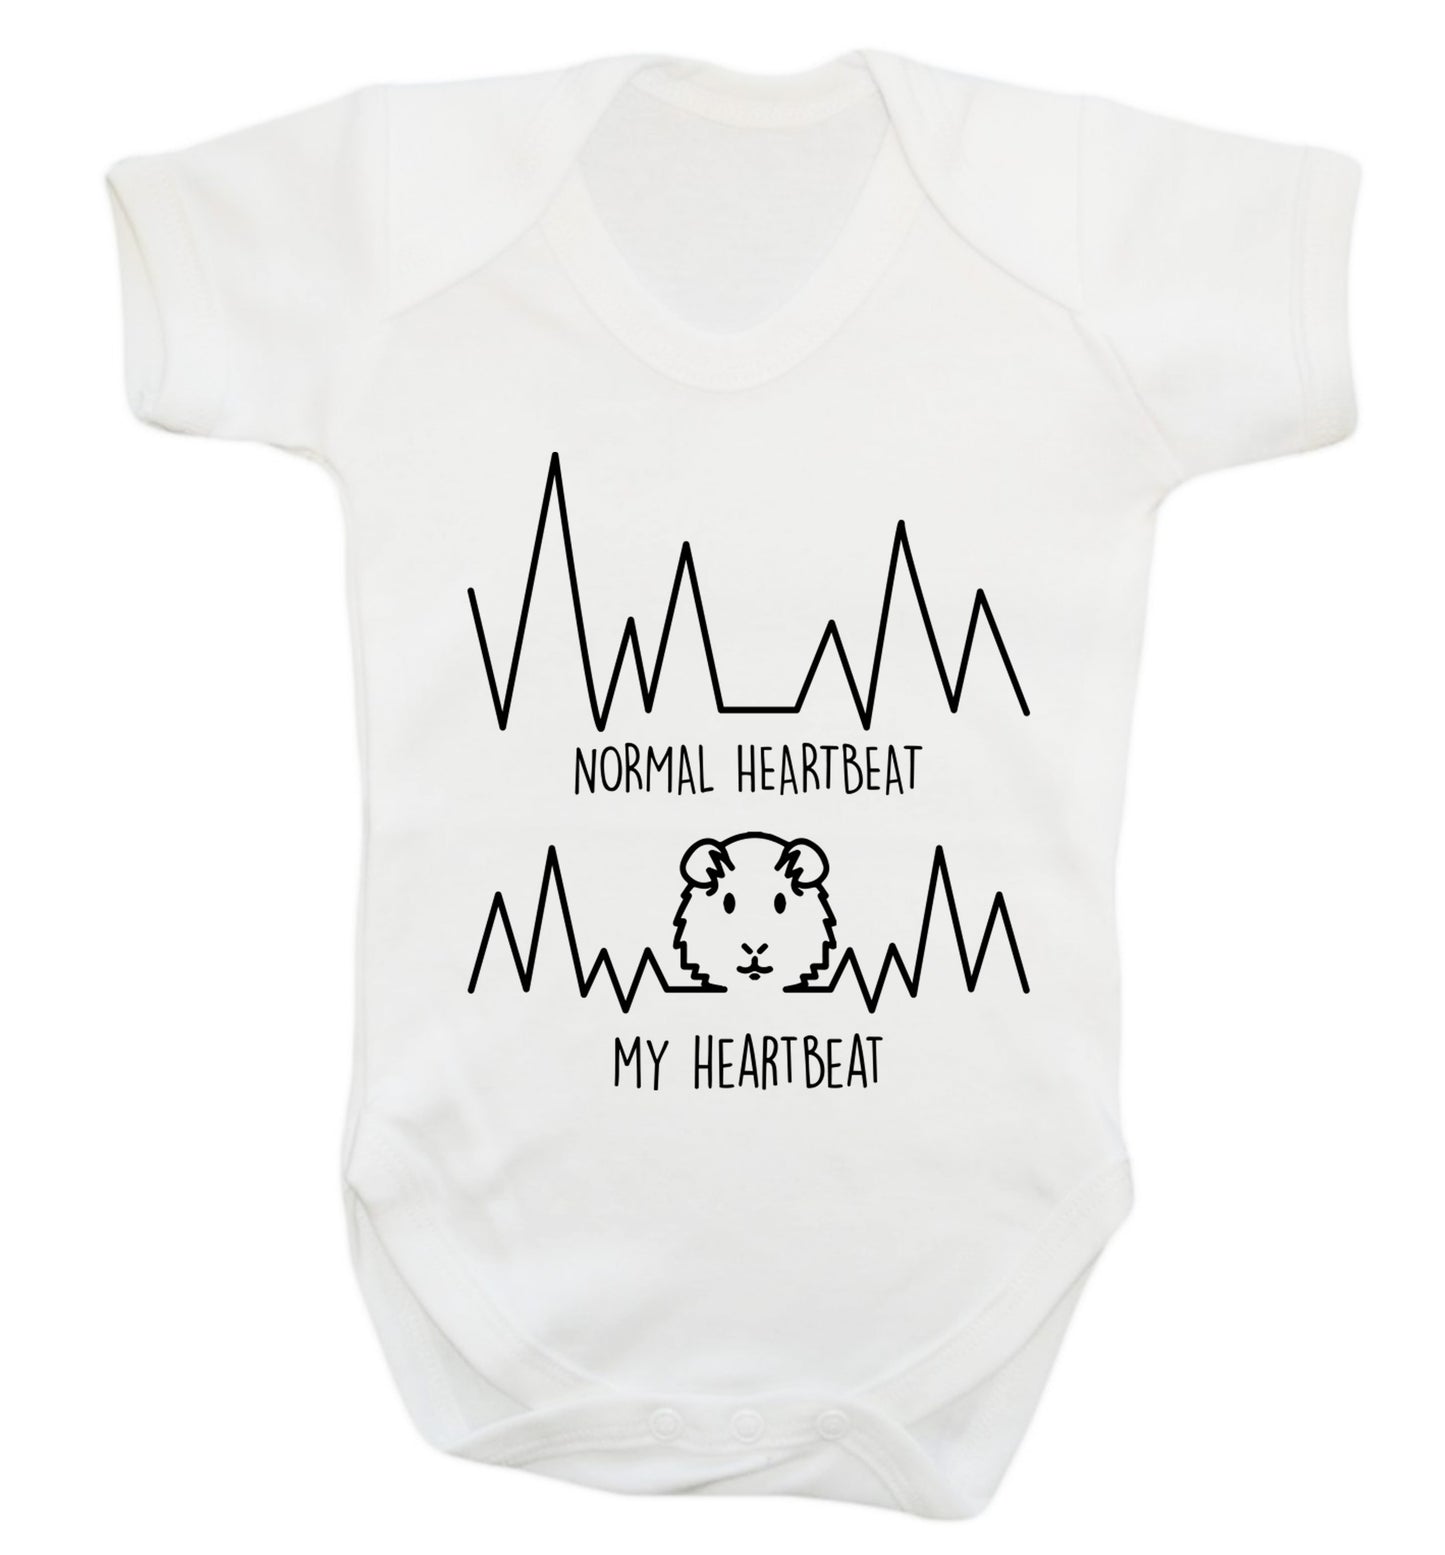 Normal heartbeat vs my heartbeat guinea pig lover Baby Vest white 18-24 months